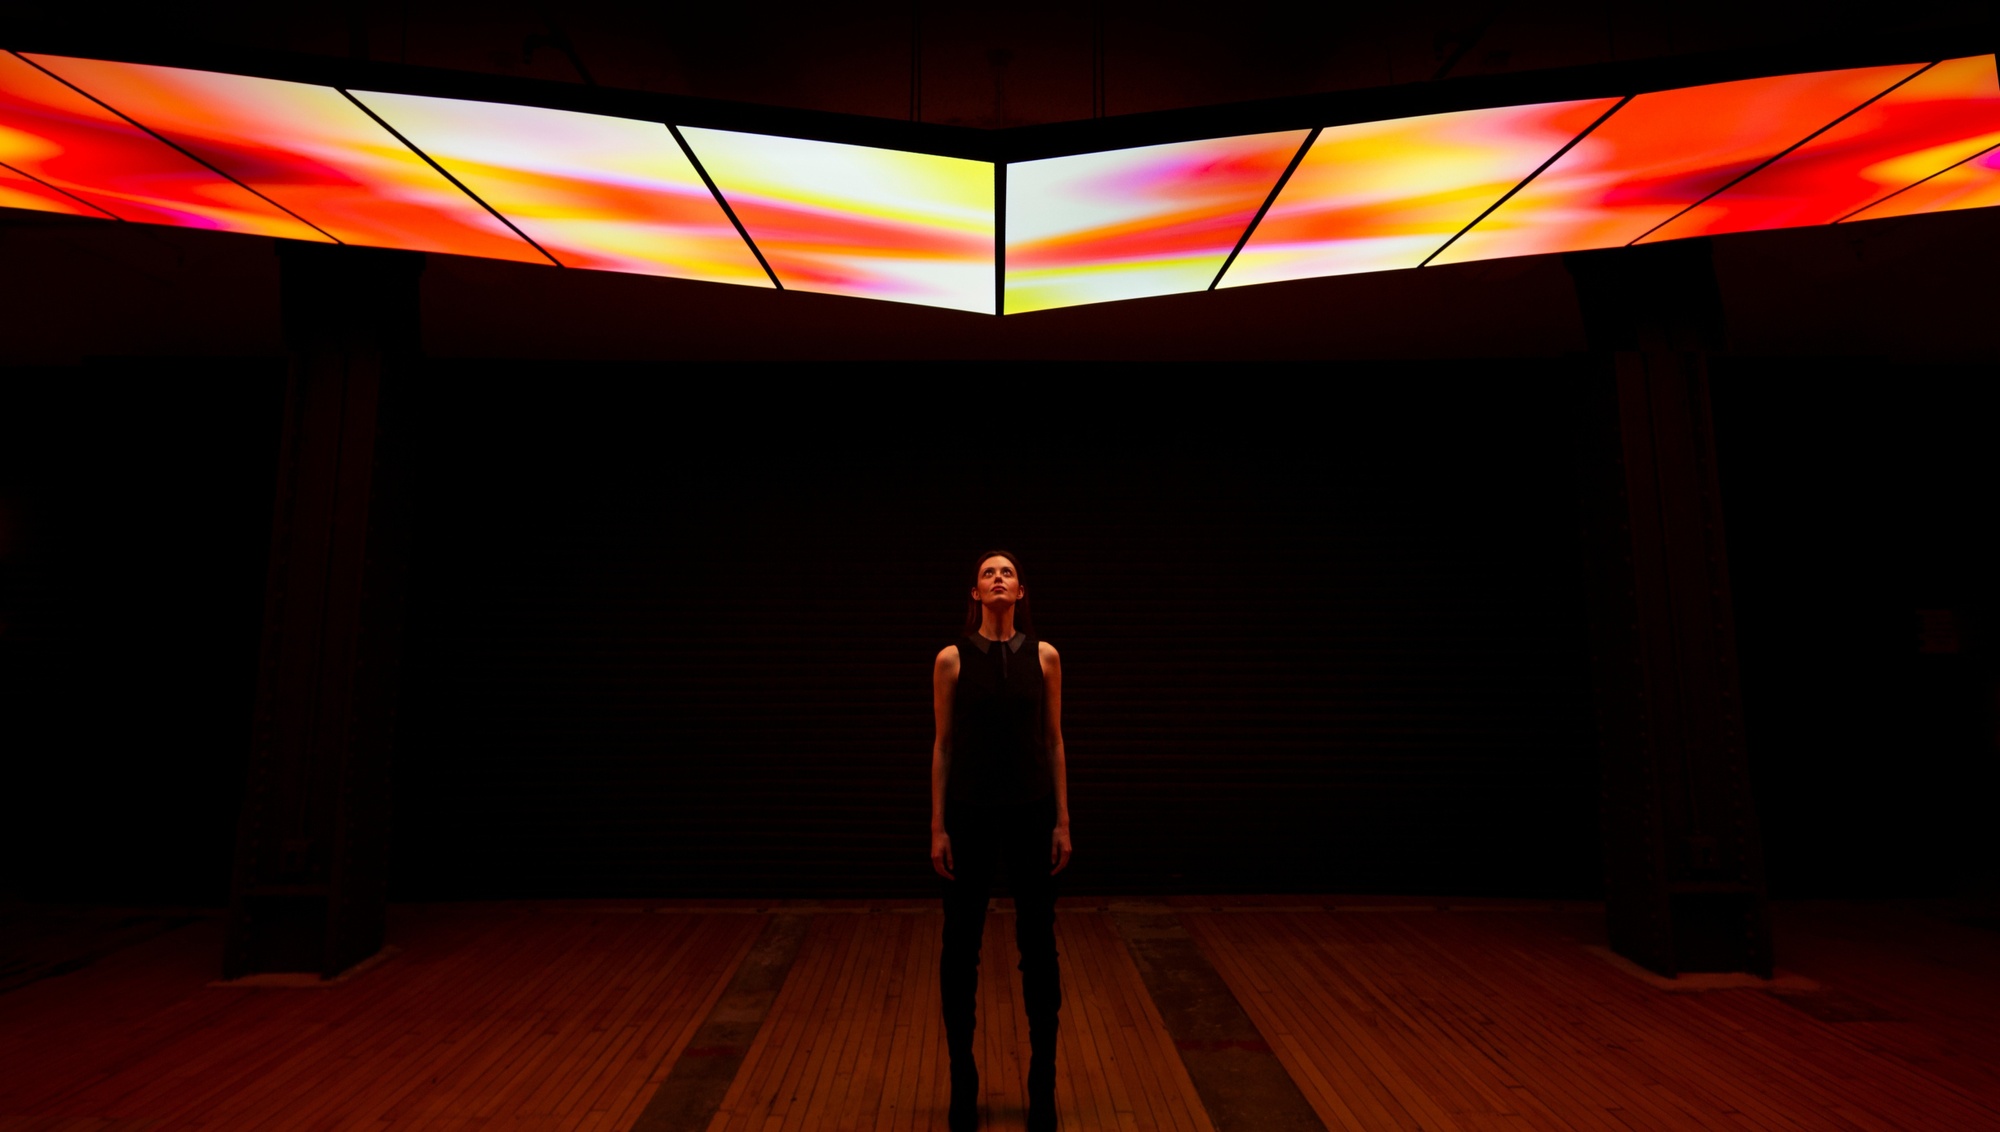 Symmetrical image of a woman looking up at The Skywalk structure, which dips in the center, and glows with a mesmerizing white, red and yellow gradient